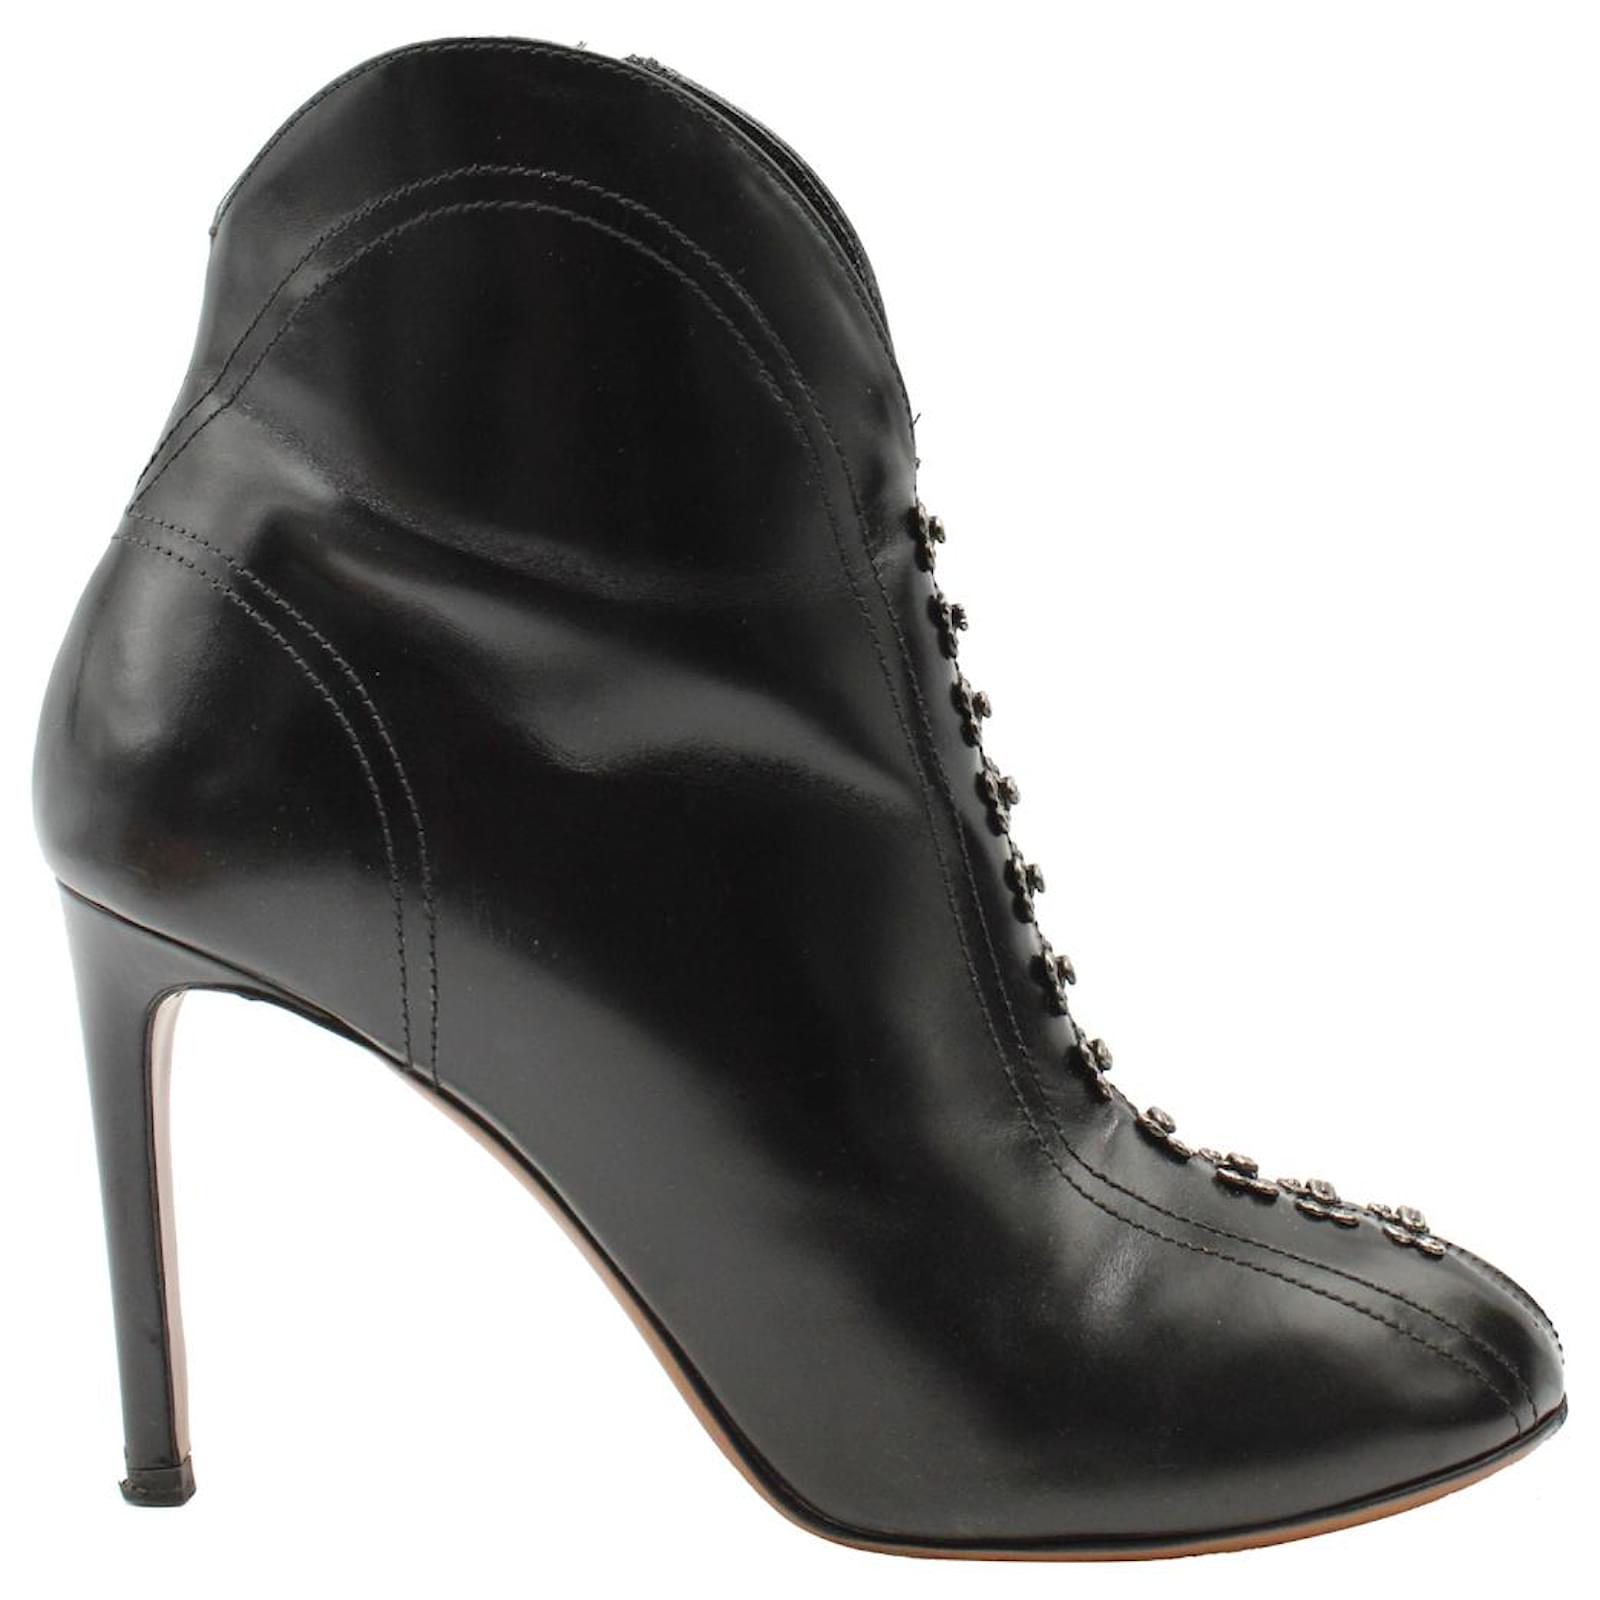 alaia hook and eye embellished booties in black leather